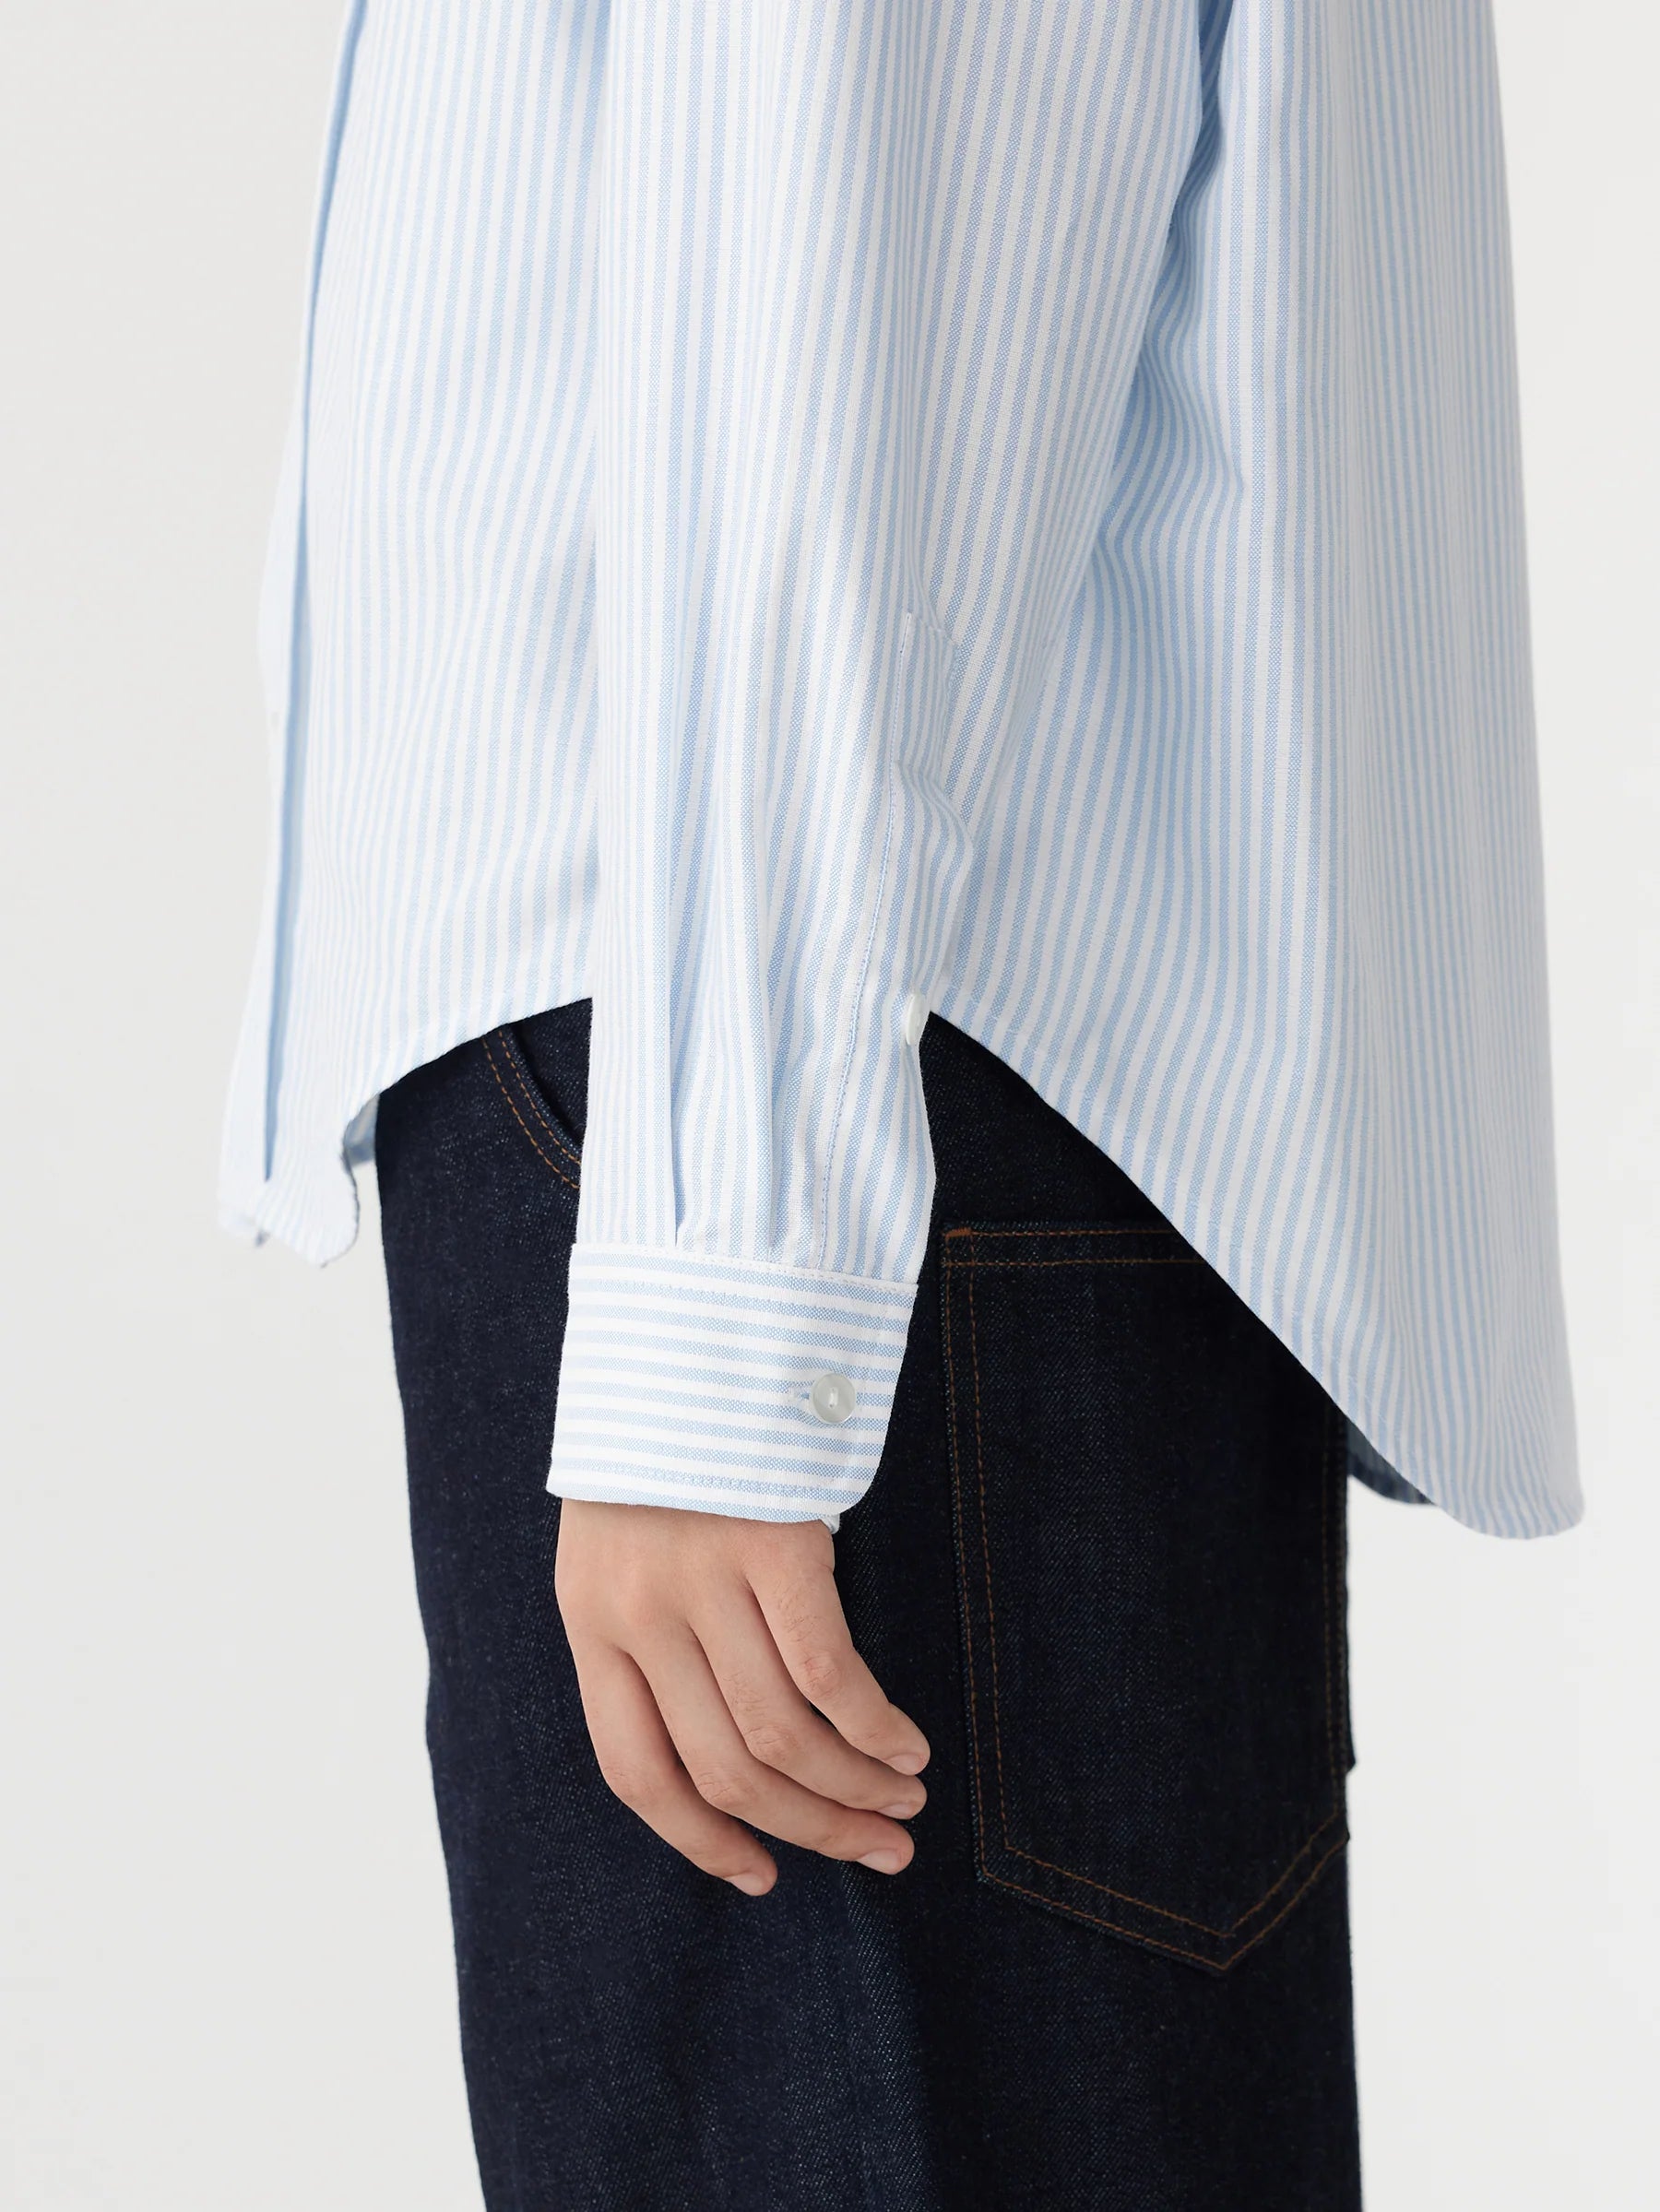 Oversized Universal Shirt | White and Pale Blue